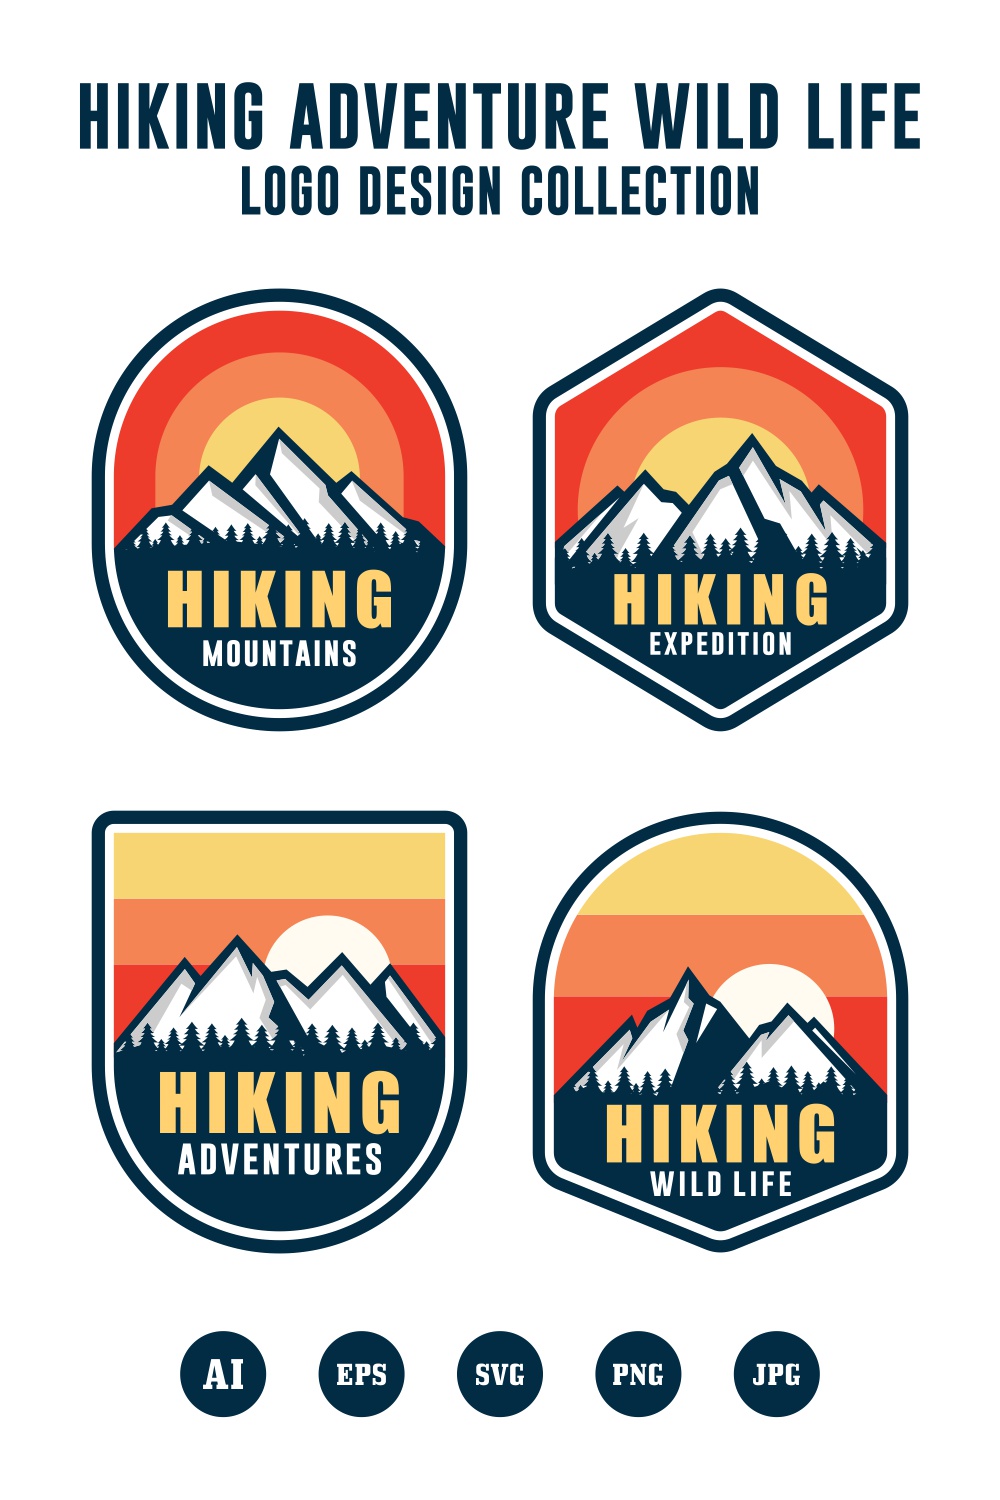 Set Hiking Adventure Wild Life logo collection - $4 pinterest preview image.